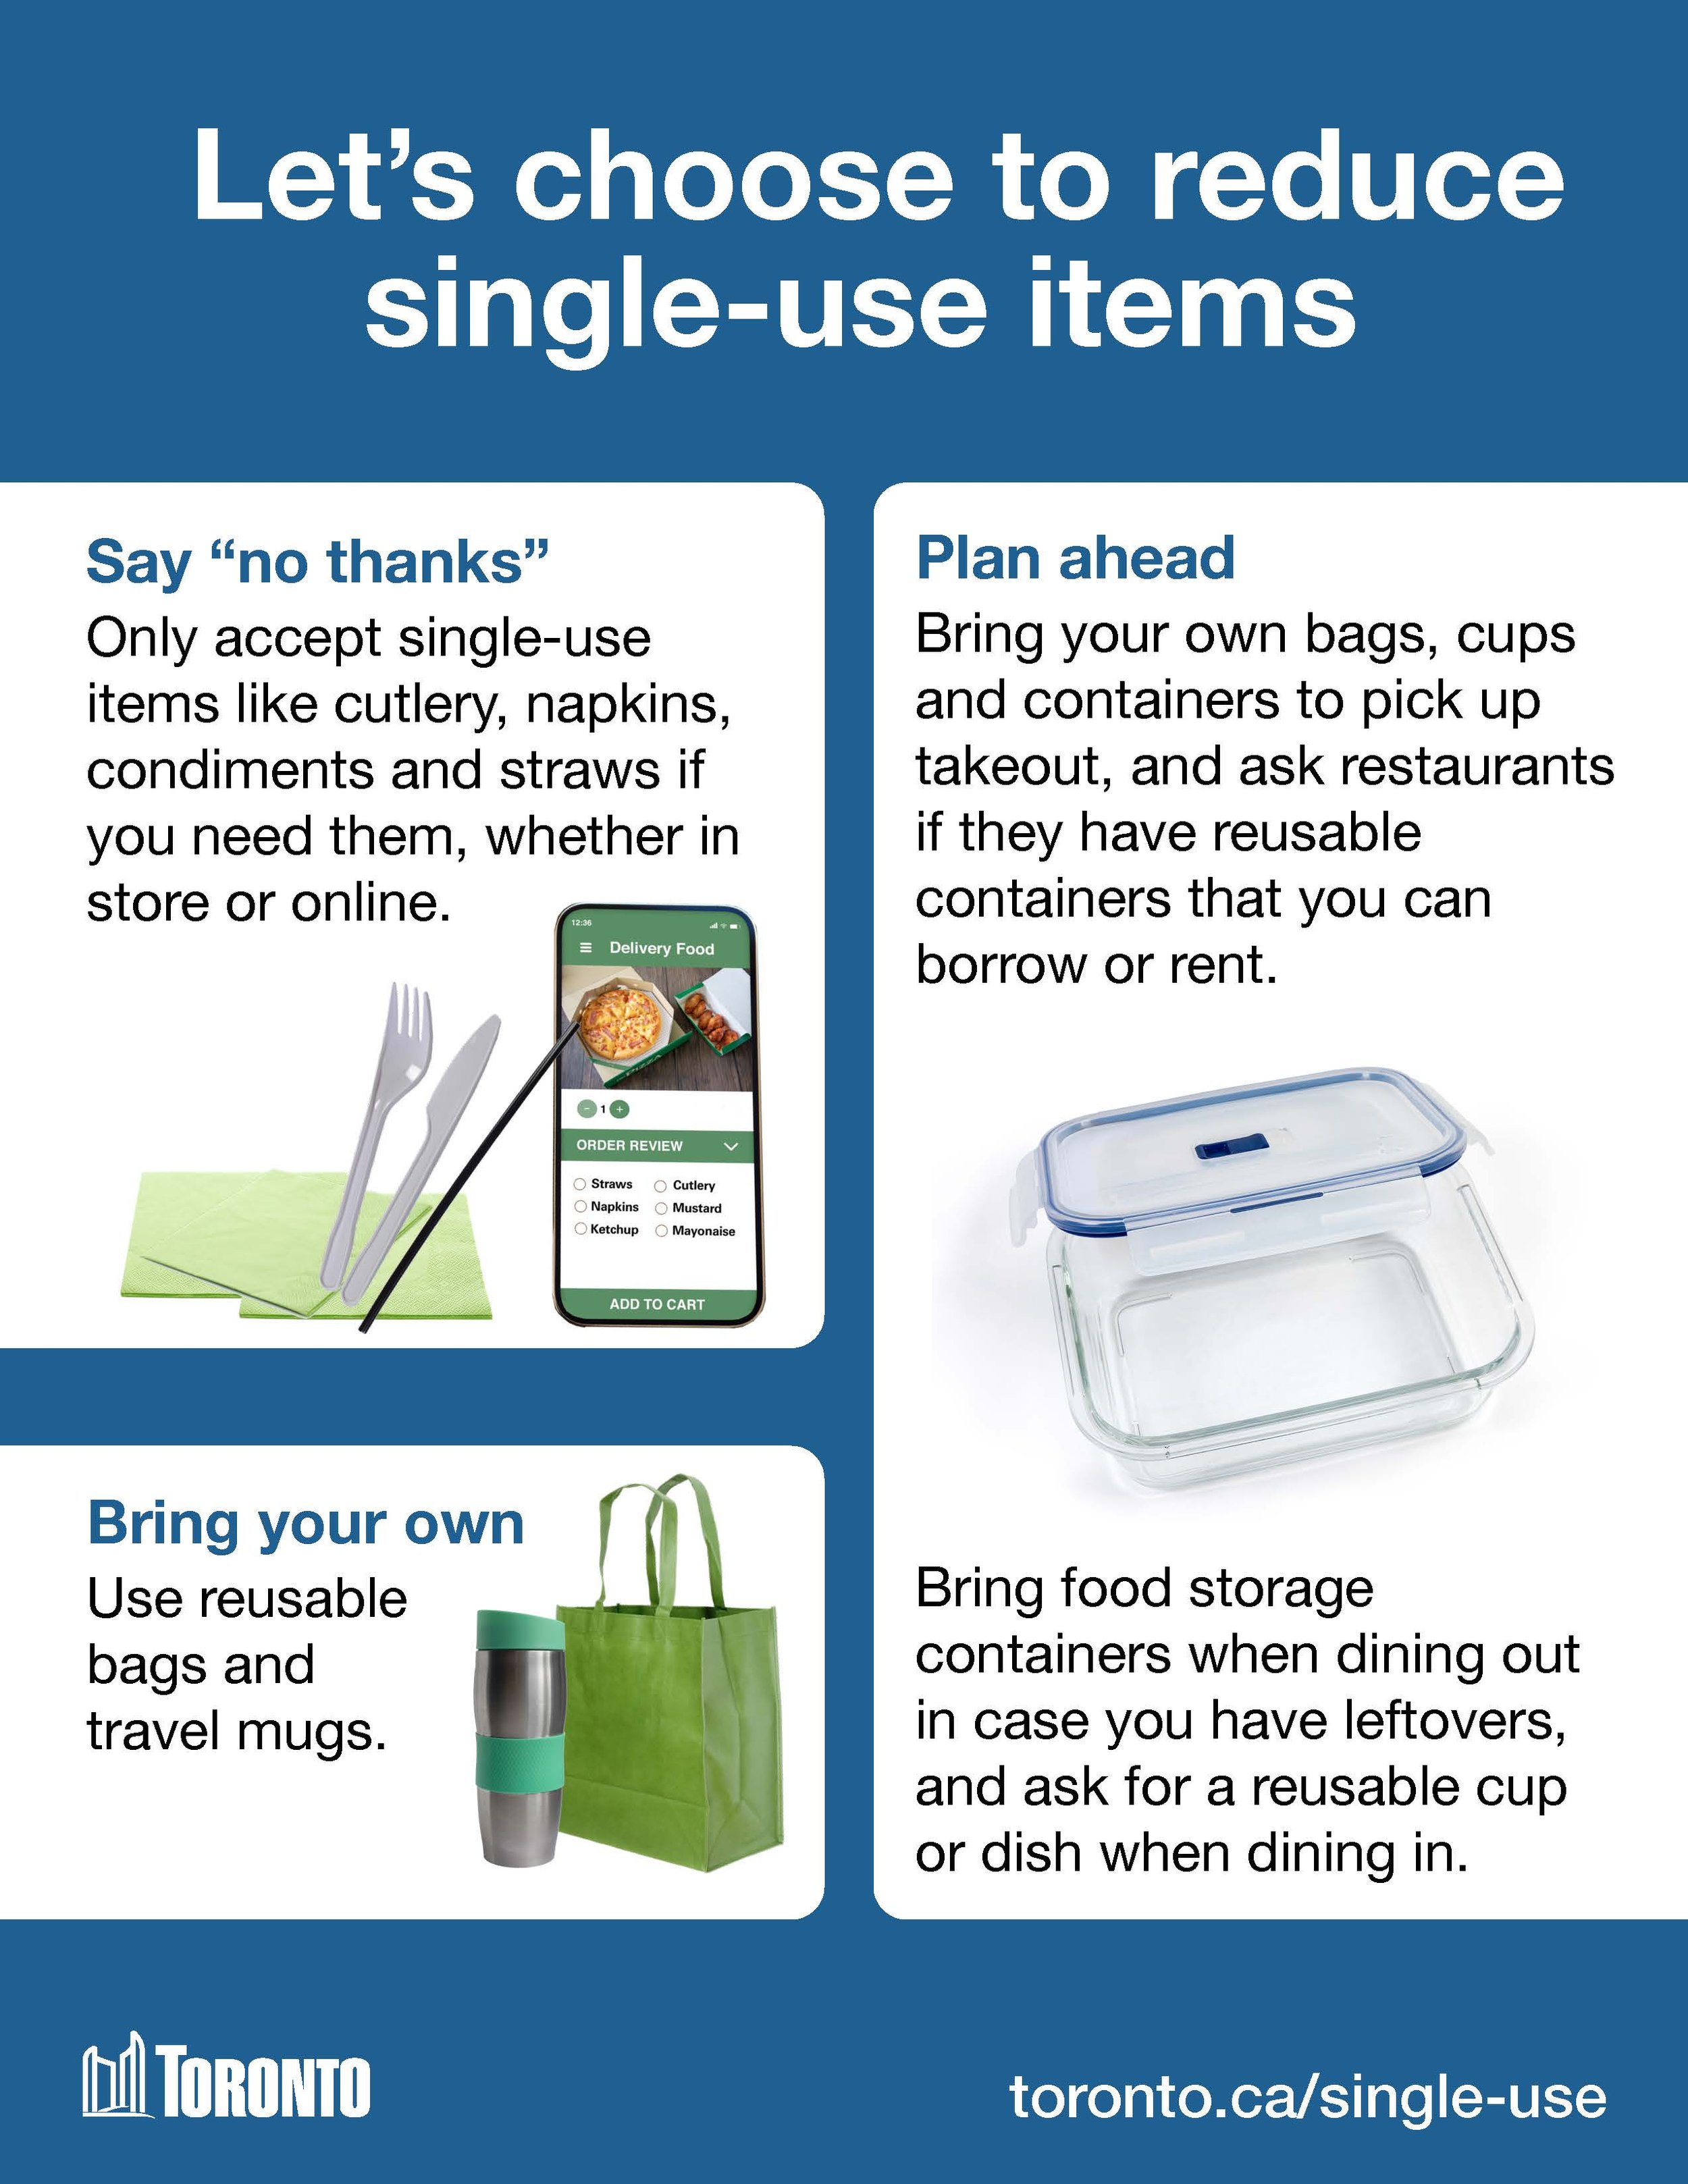 Let's choose to reduce single-use items